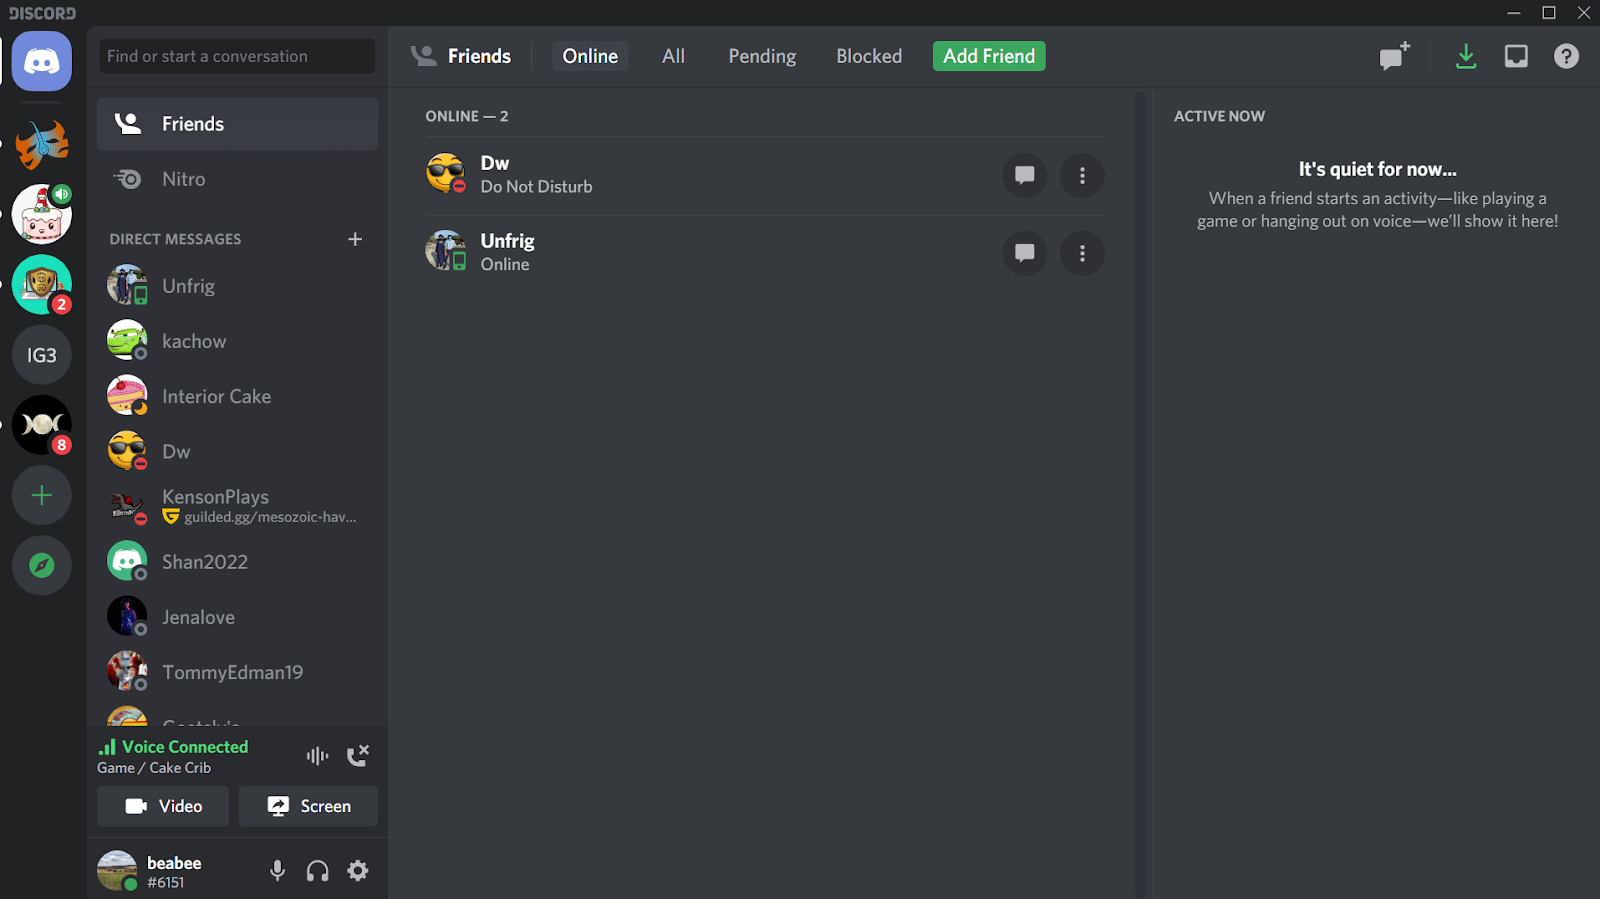 A screenshot of the Discord desktop interface in dark mode, featuring white text on a dark gray background.